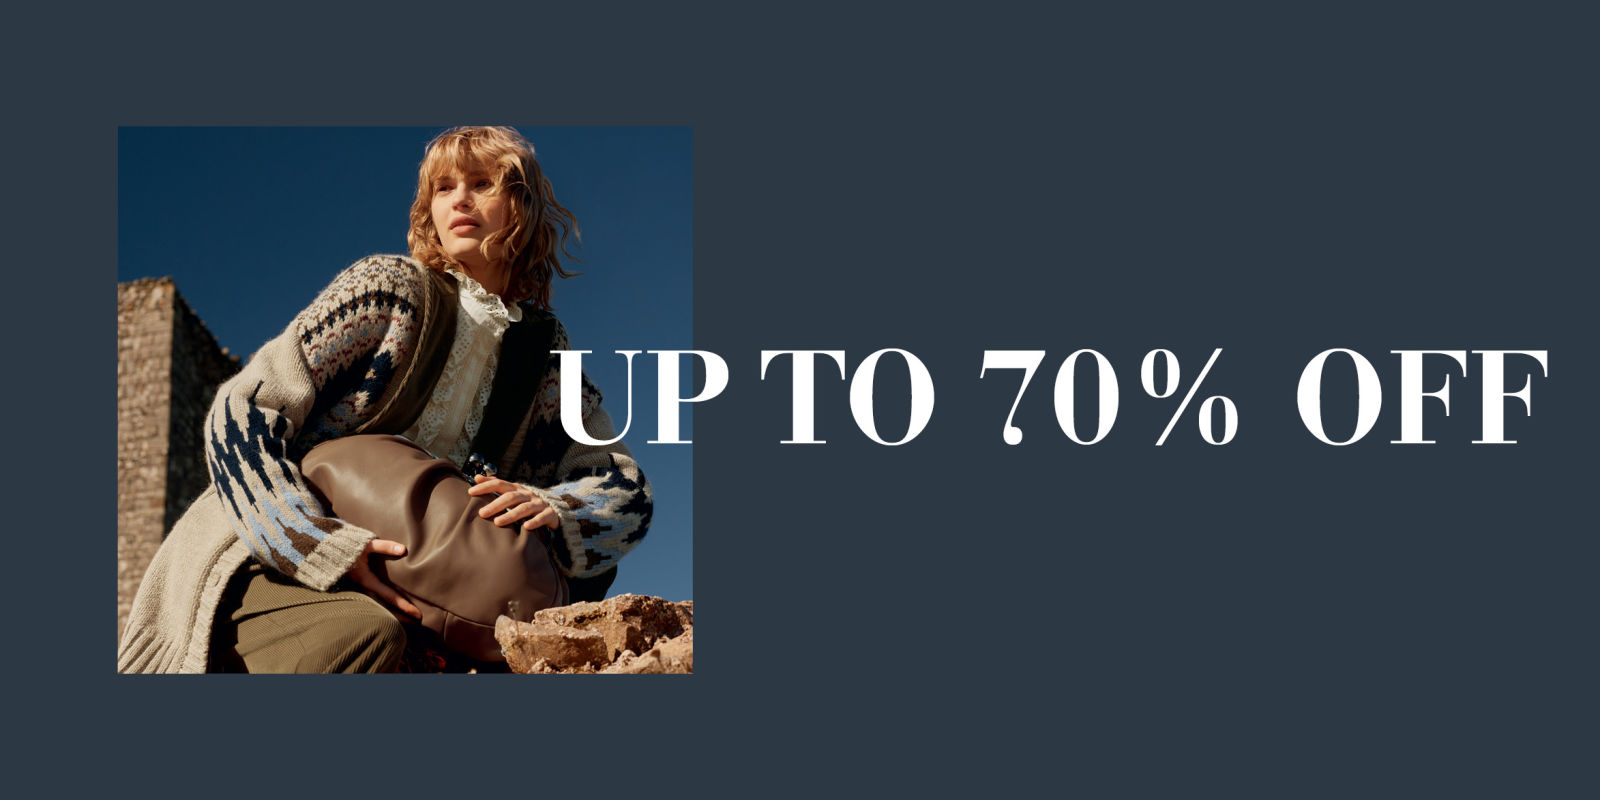 [Image] [offer] January Sale at Weekend Max Mara | Up to 70% Off